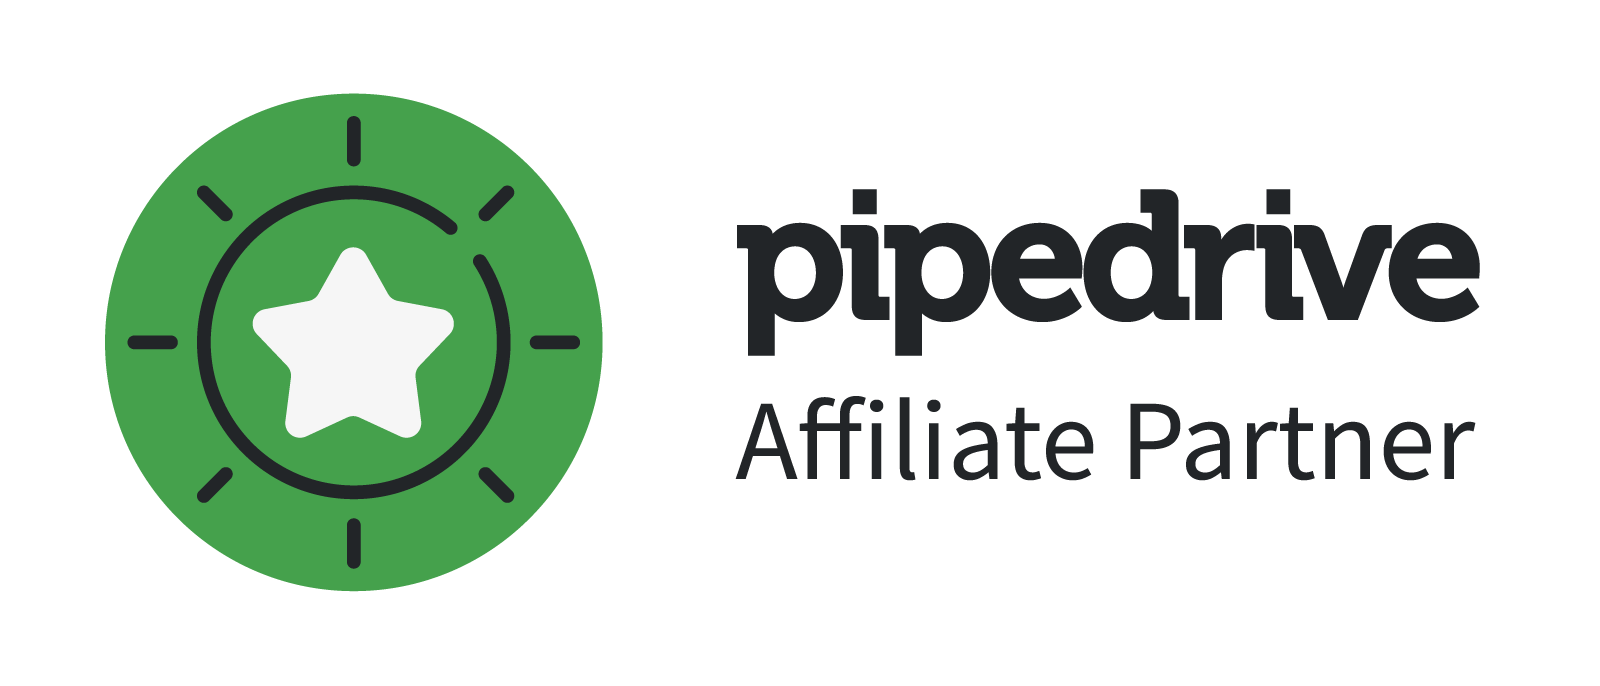 Hire a Pipedrive Consultant and Partner